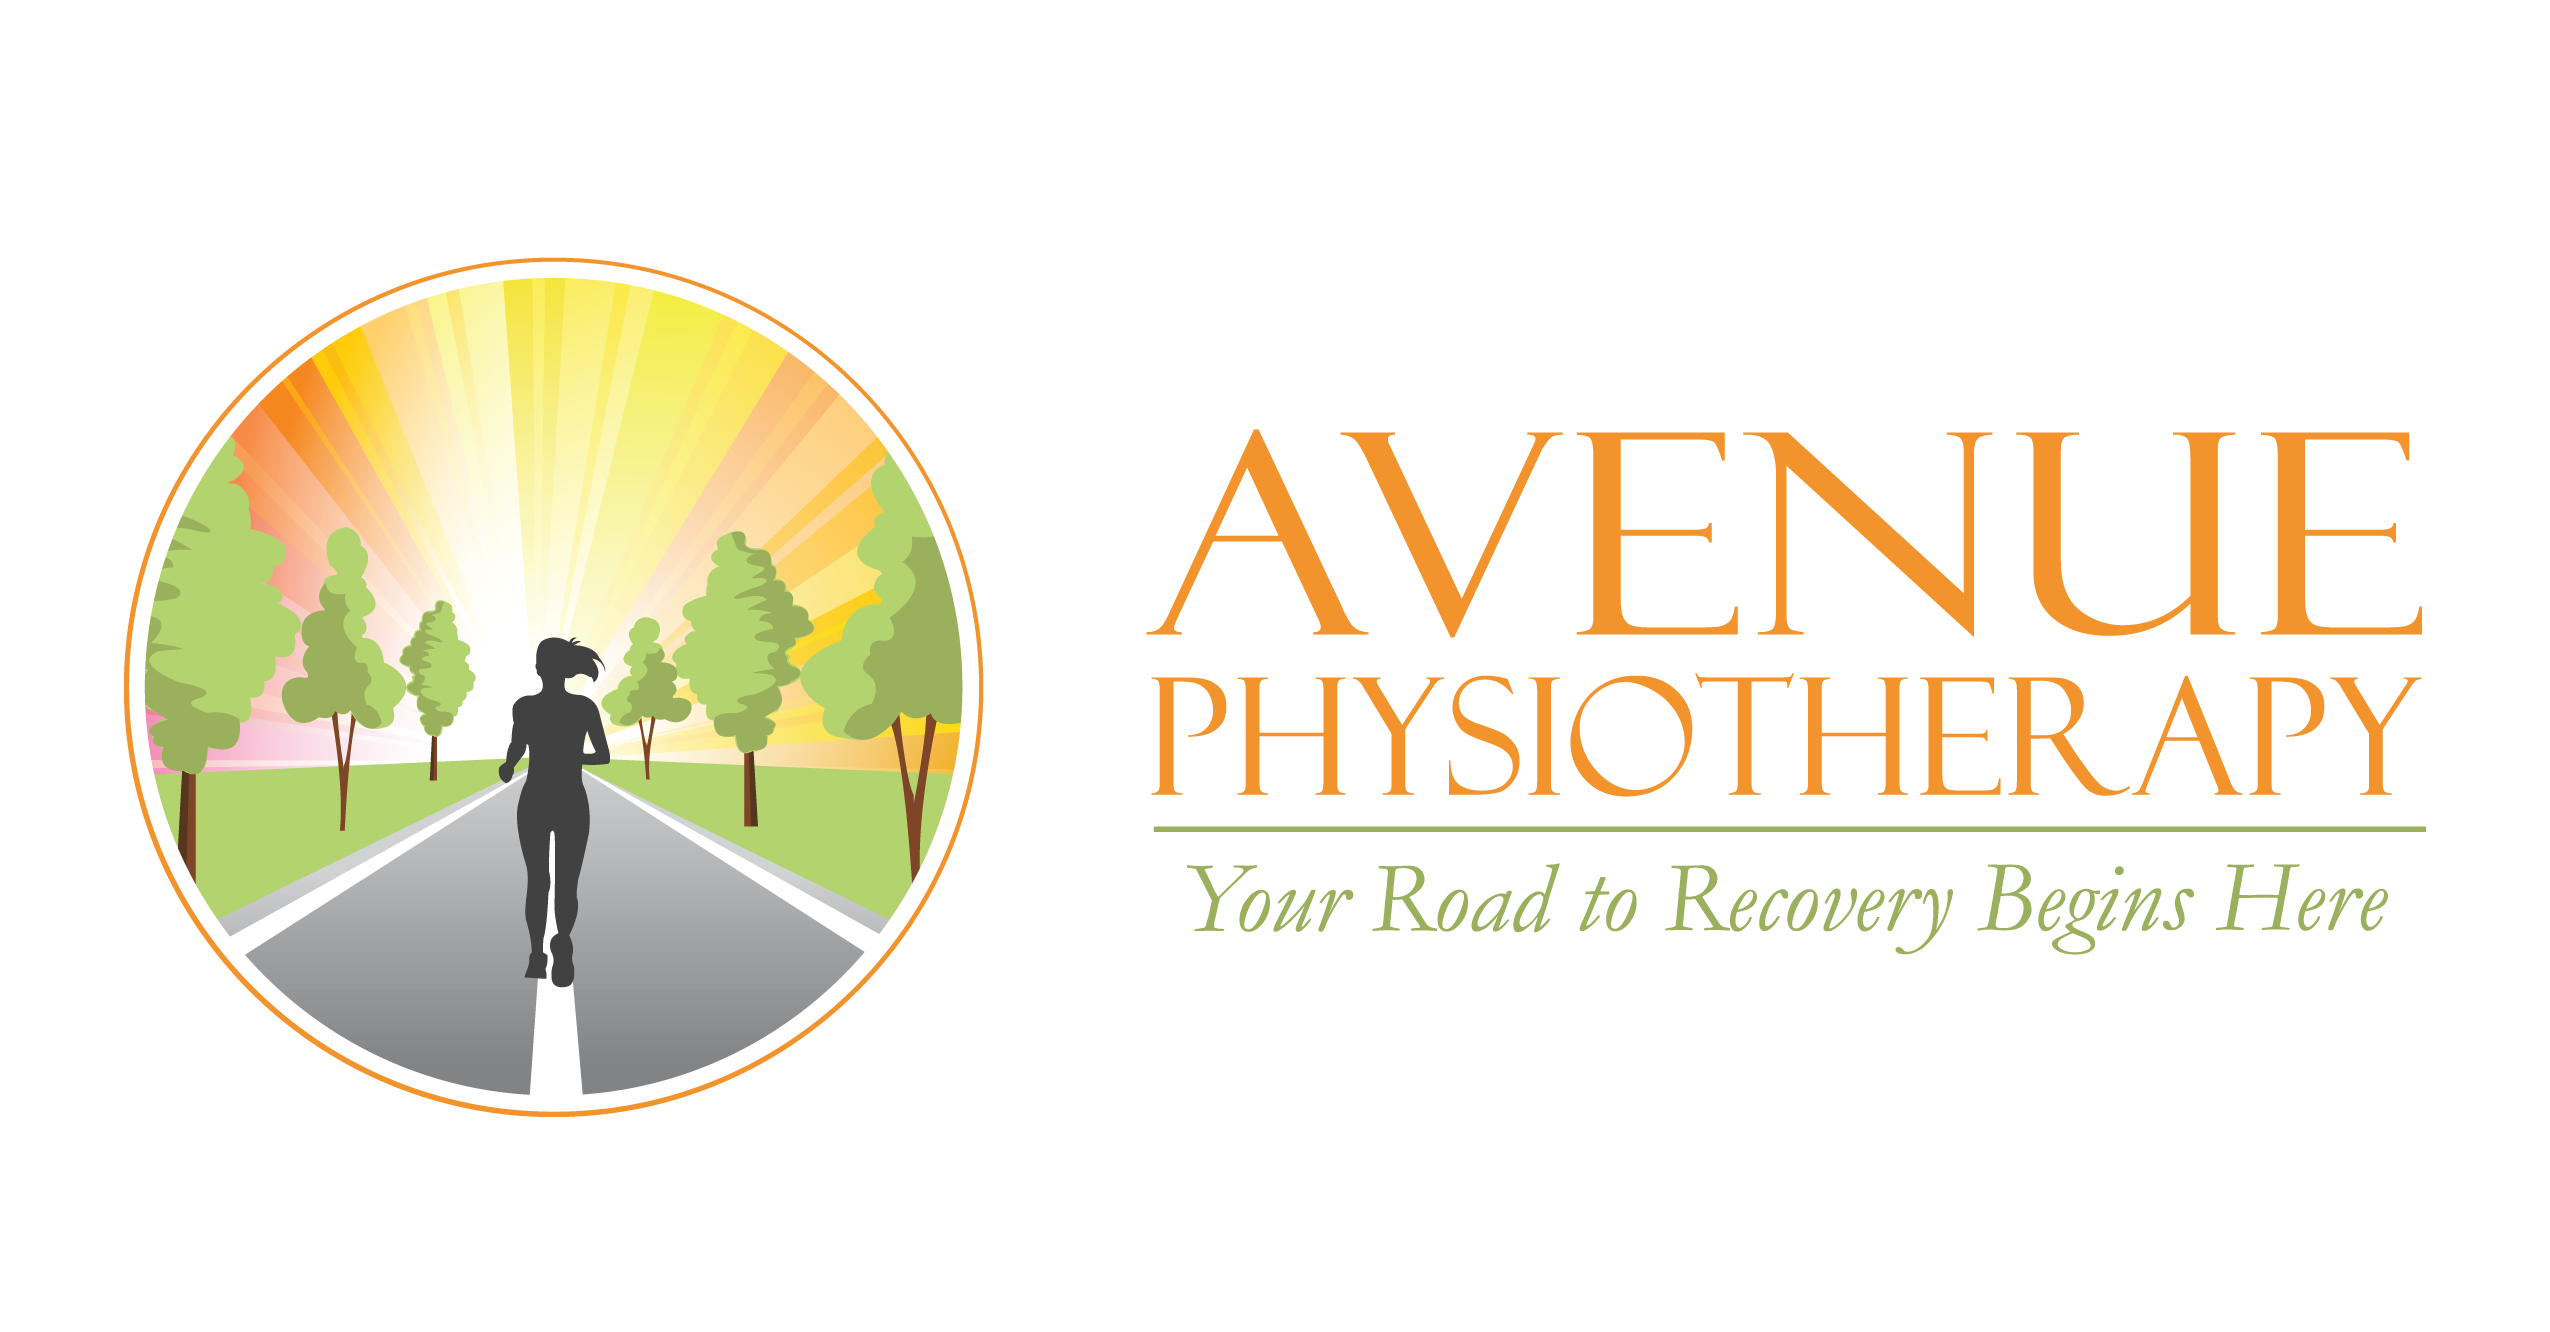 Avenue Physiotherapy is hiring!